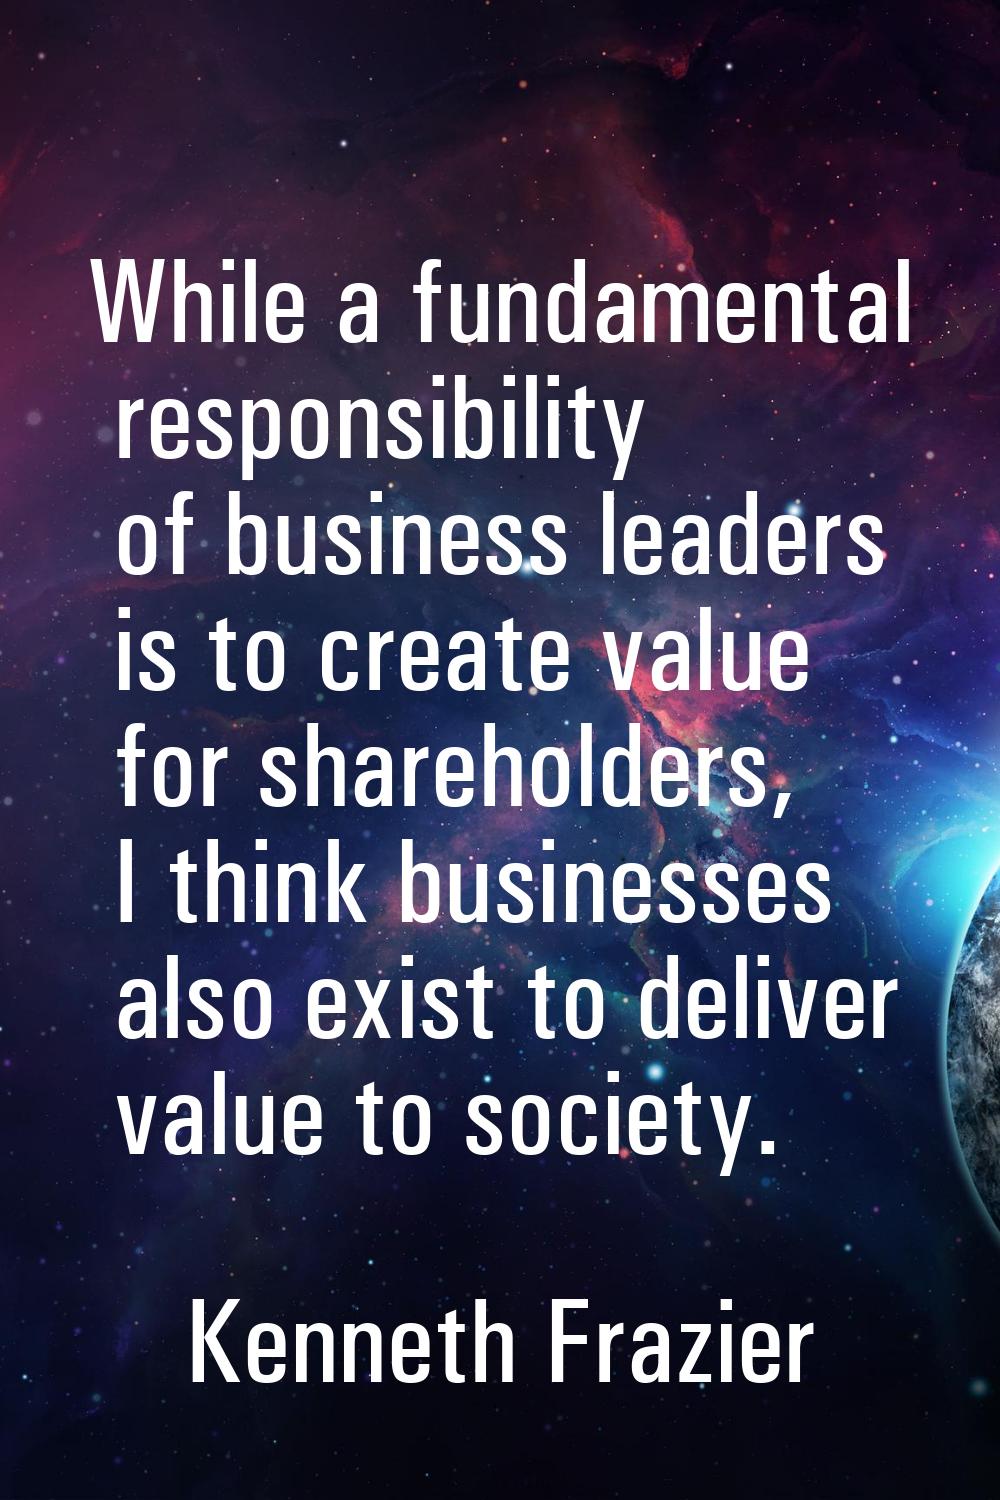 While a fundamental responsibility of business leaders is to create value for shareholders, I think